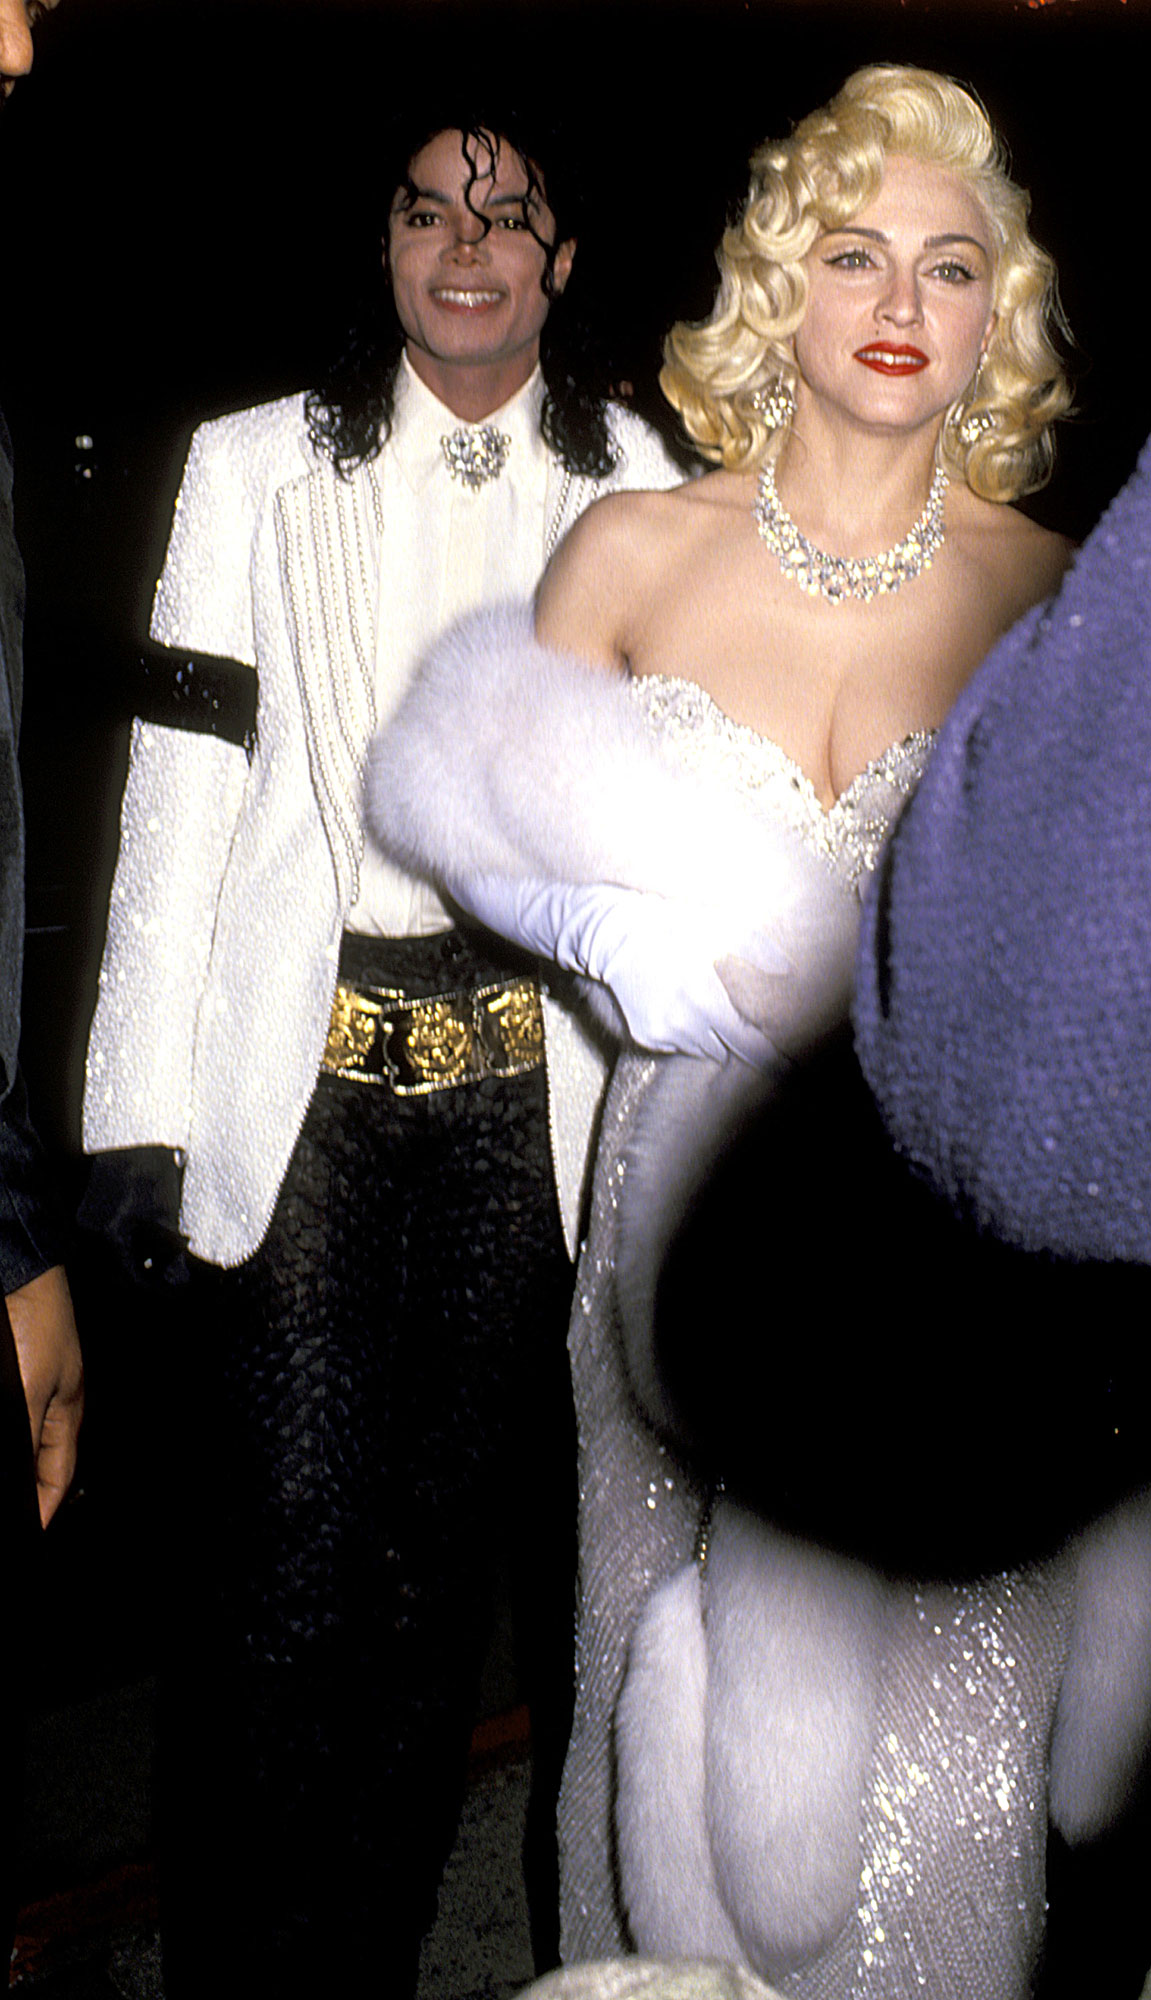 Michael Jackson and Madonna Hottest Oscars Duos, Dates and Couples of All Time